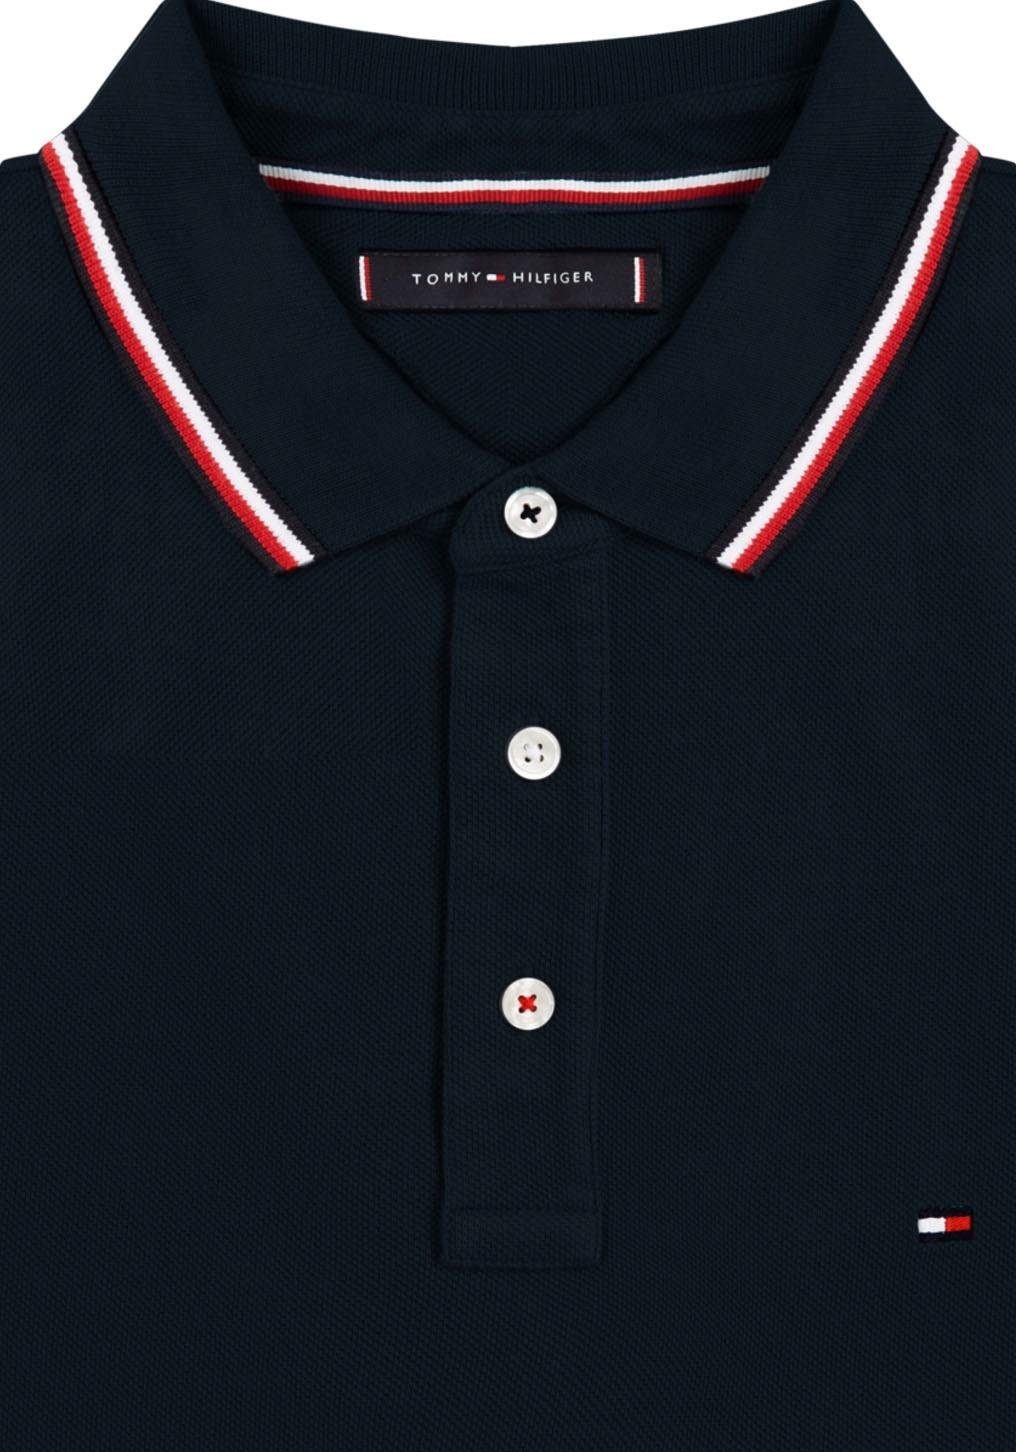 POLO« Tommy SLIM »TOMMY TIPPED kaufen bei Hilfiger online OTTO Poloshirt